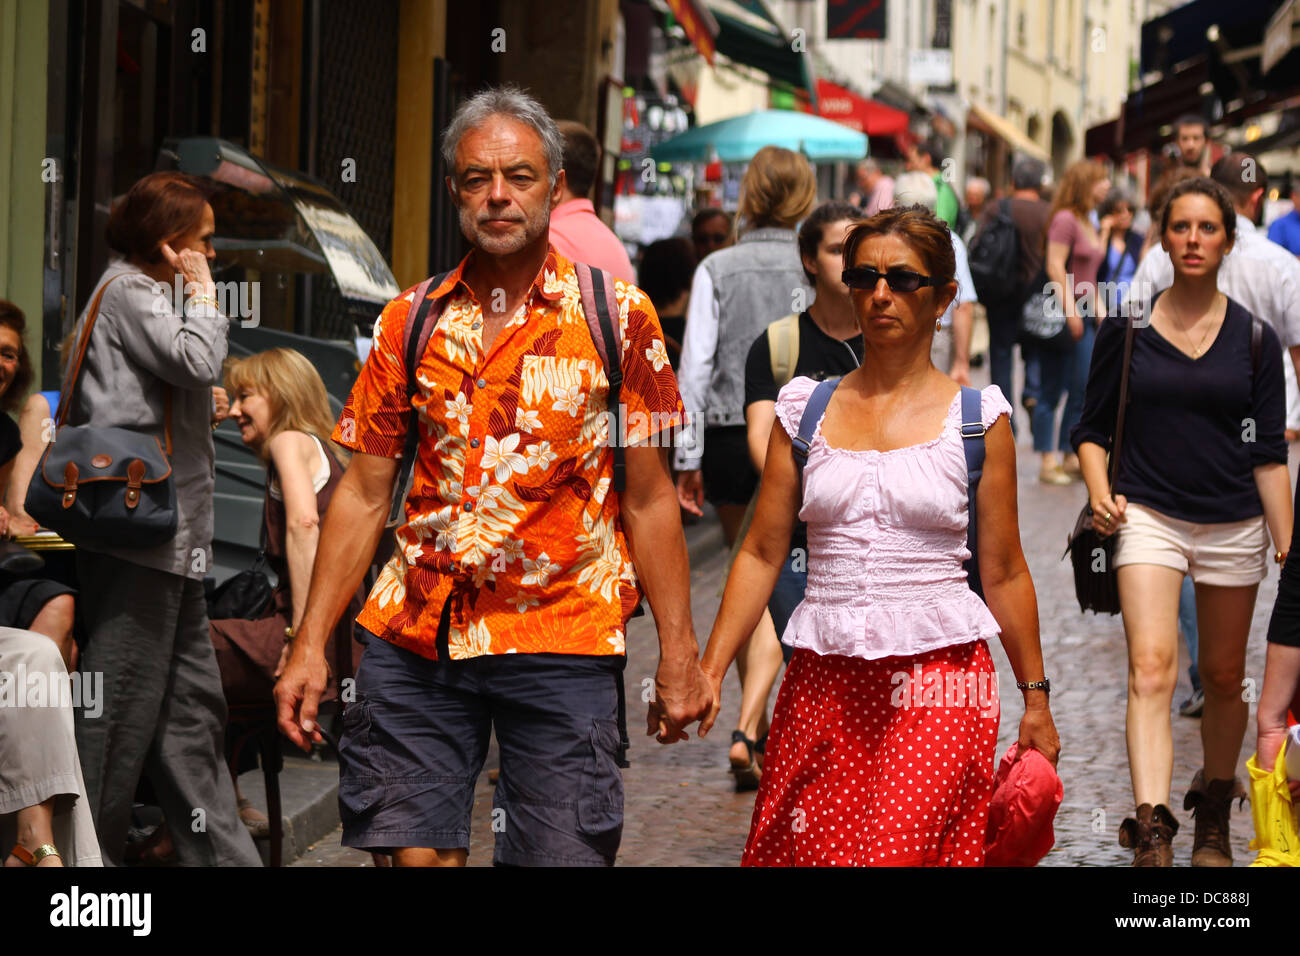 Couple of tourists walking hand by hand through the crowd at rue Mouffetard, Latin Quarter, Paris, France Stock Photo